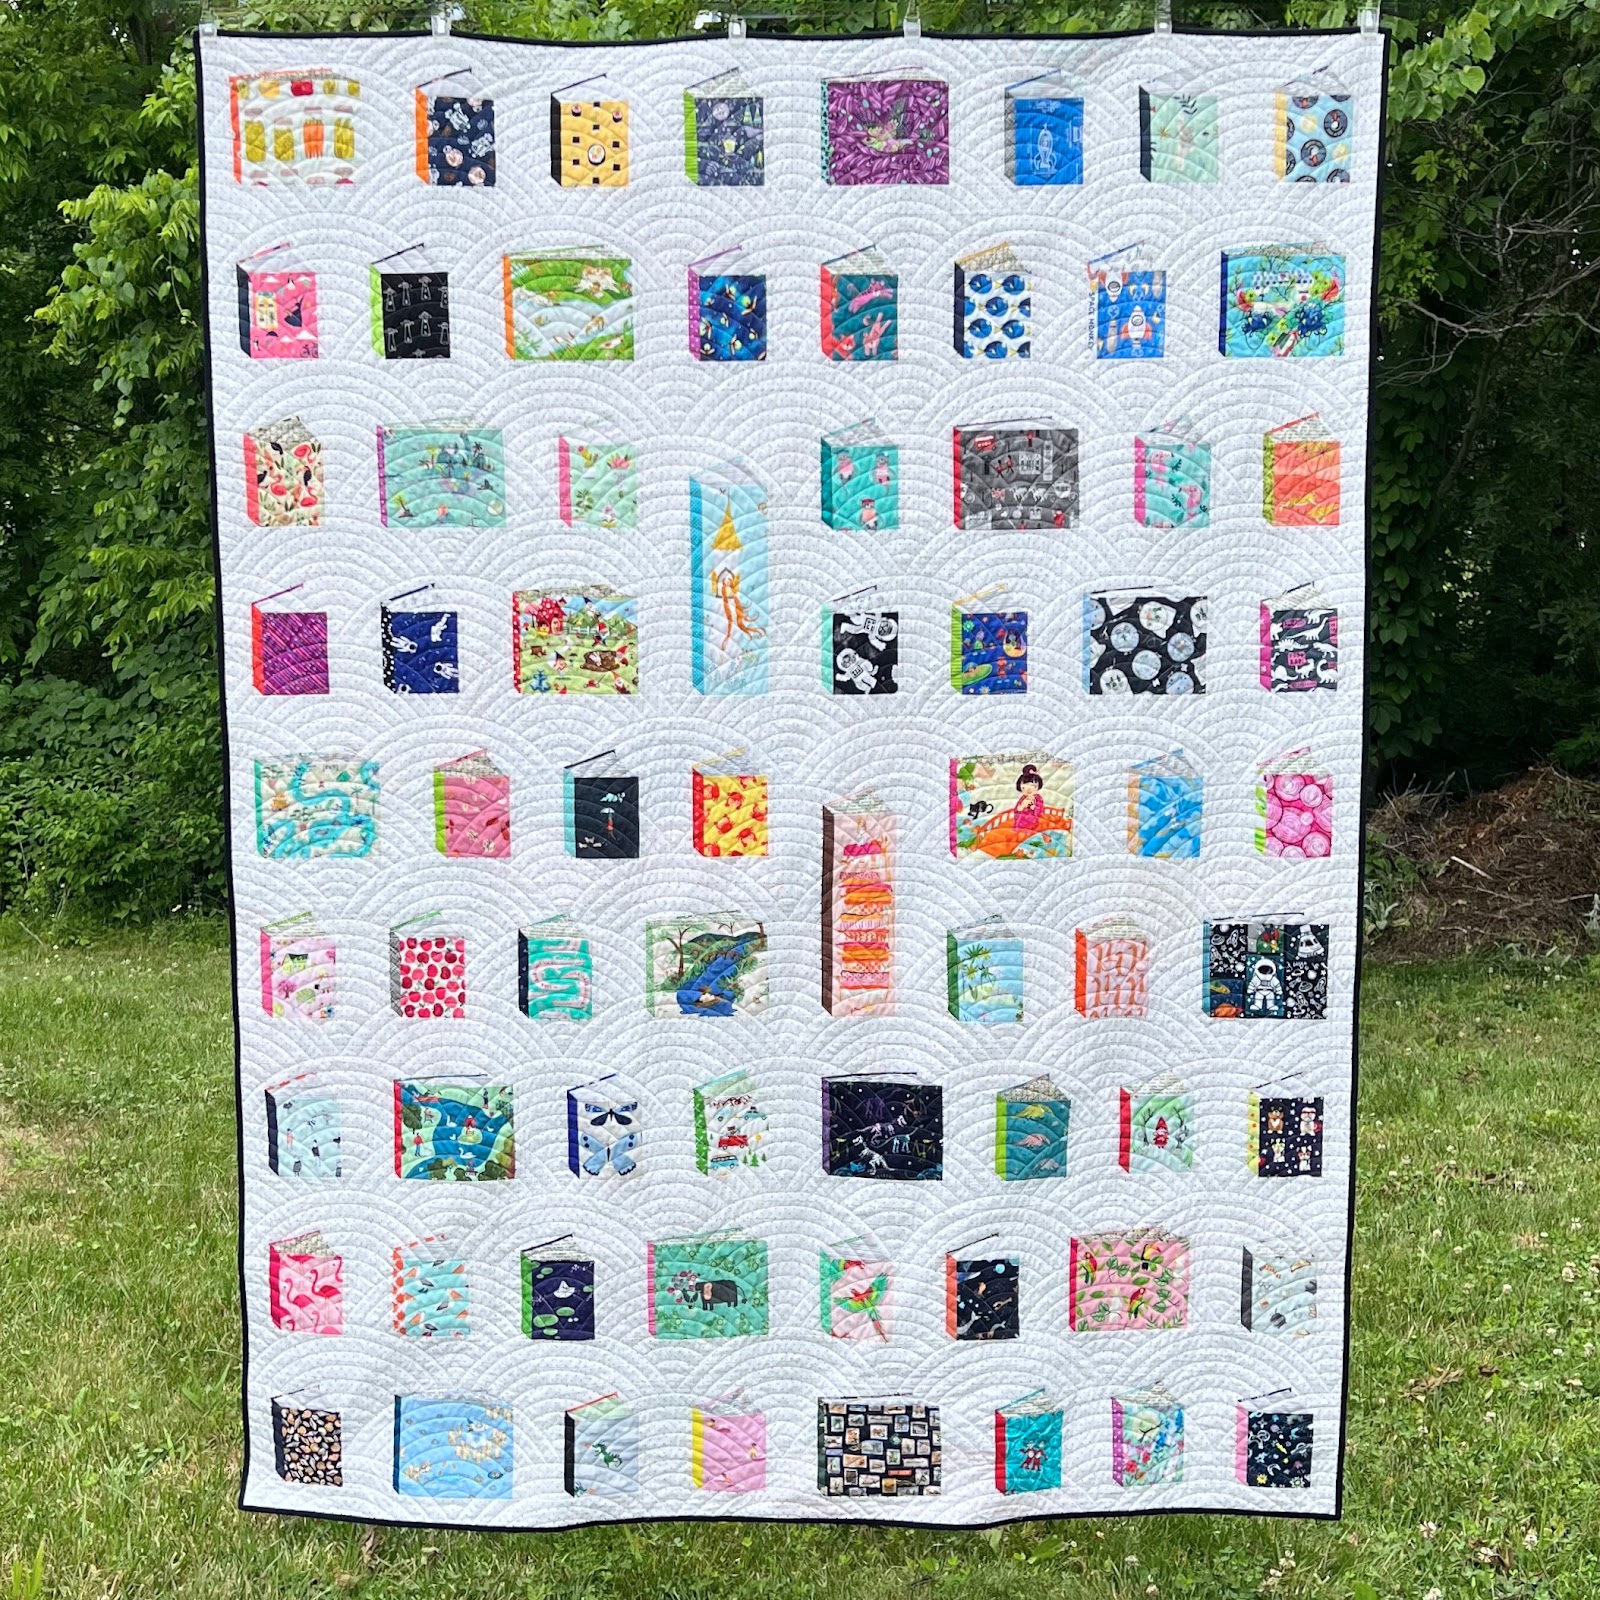 Perfectly Pieced Quilt Backs: The Scrap-Smart Guide to Finishing Quilts with Two-Sided Appeal [Book]